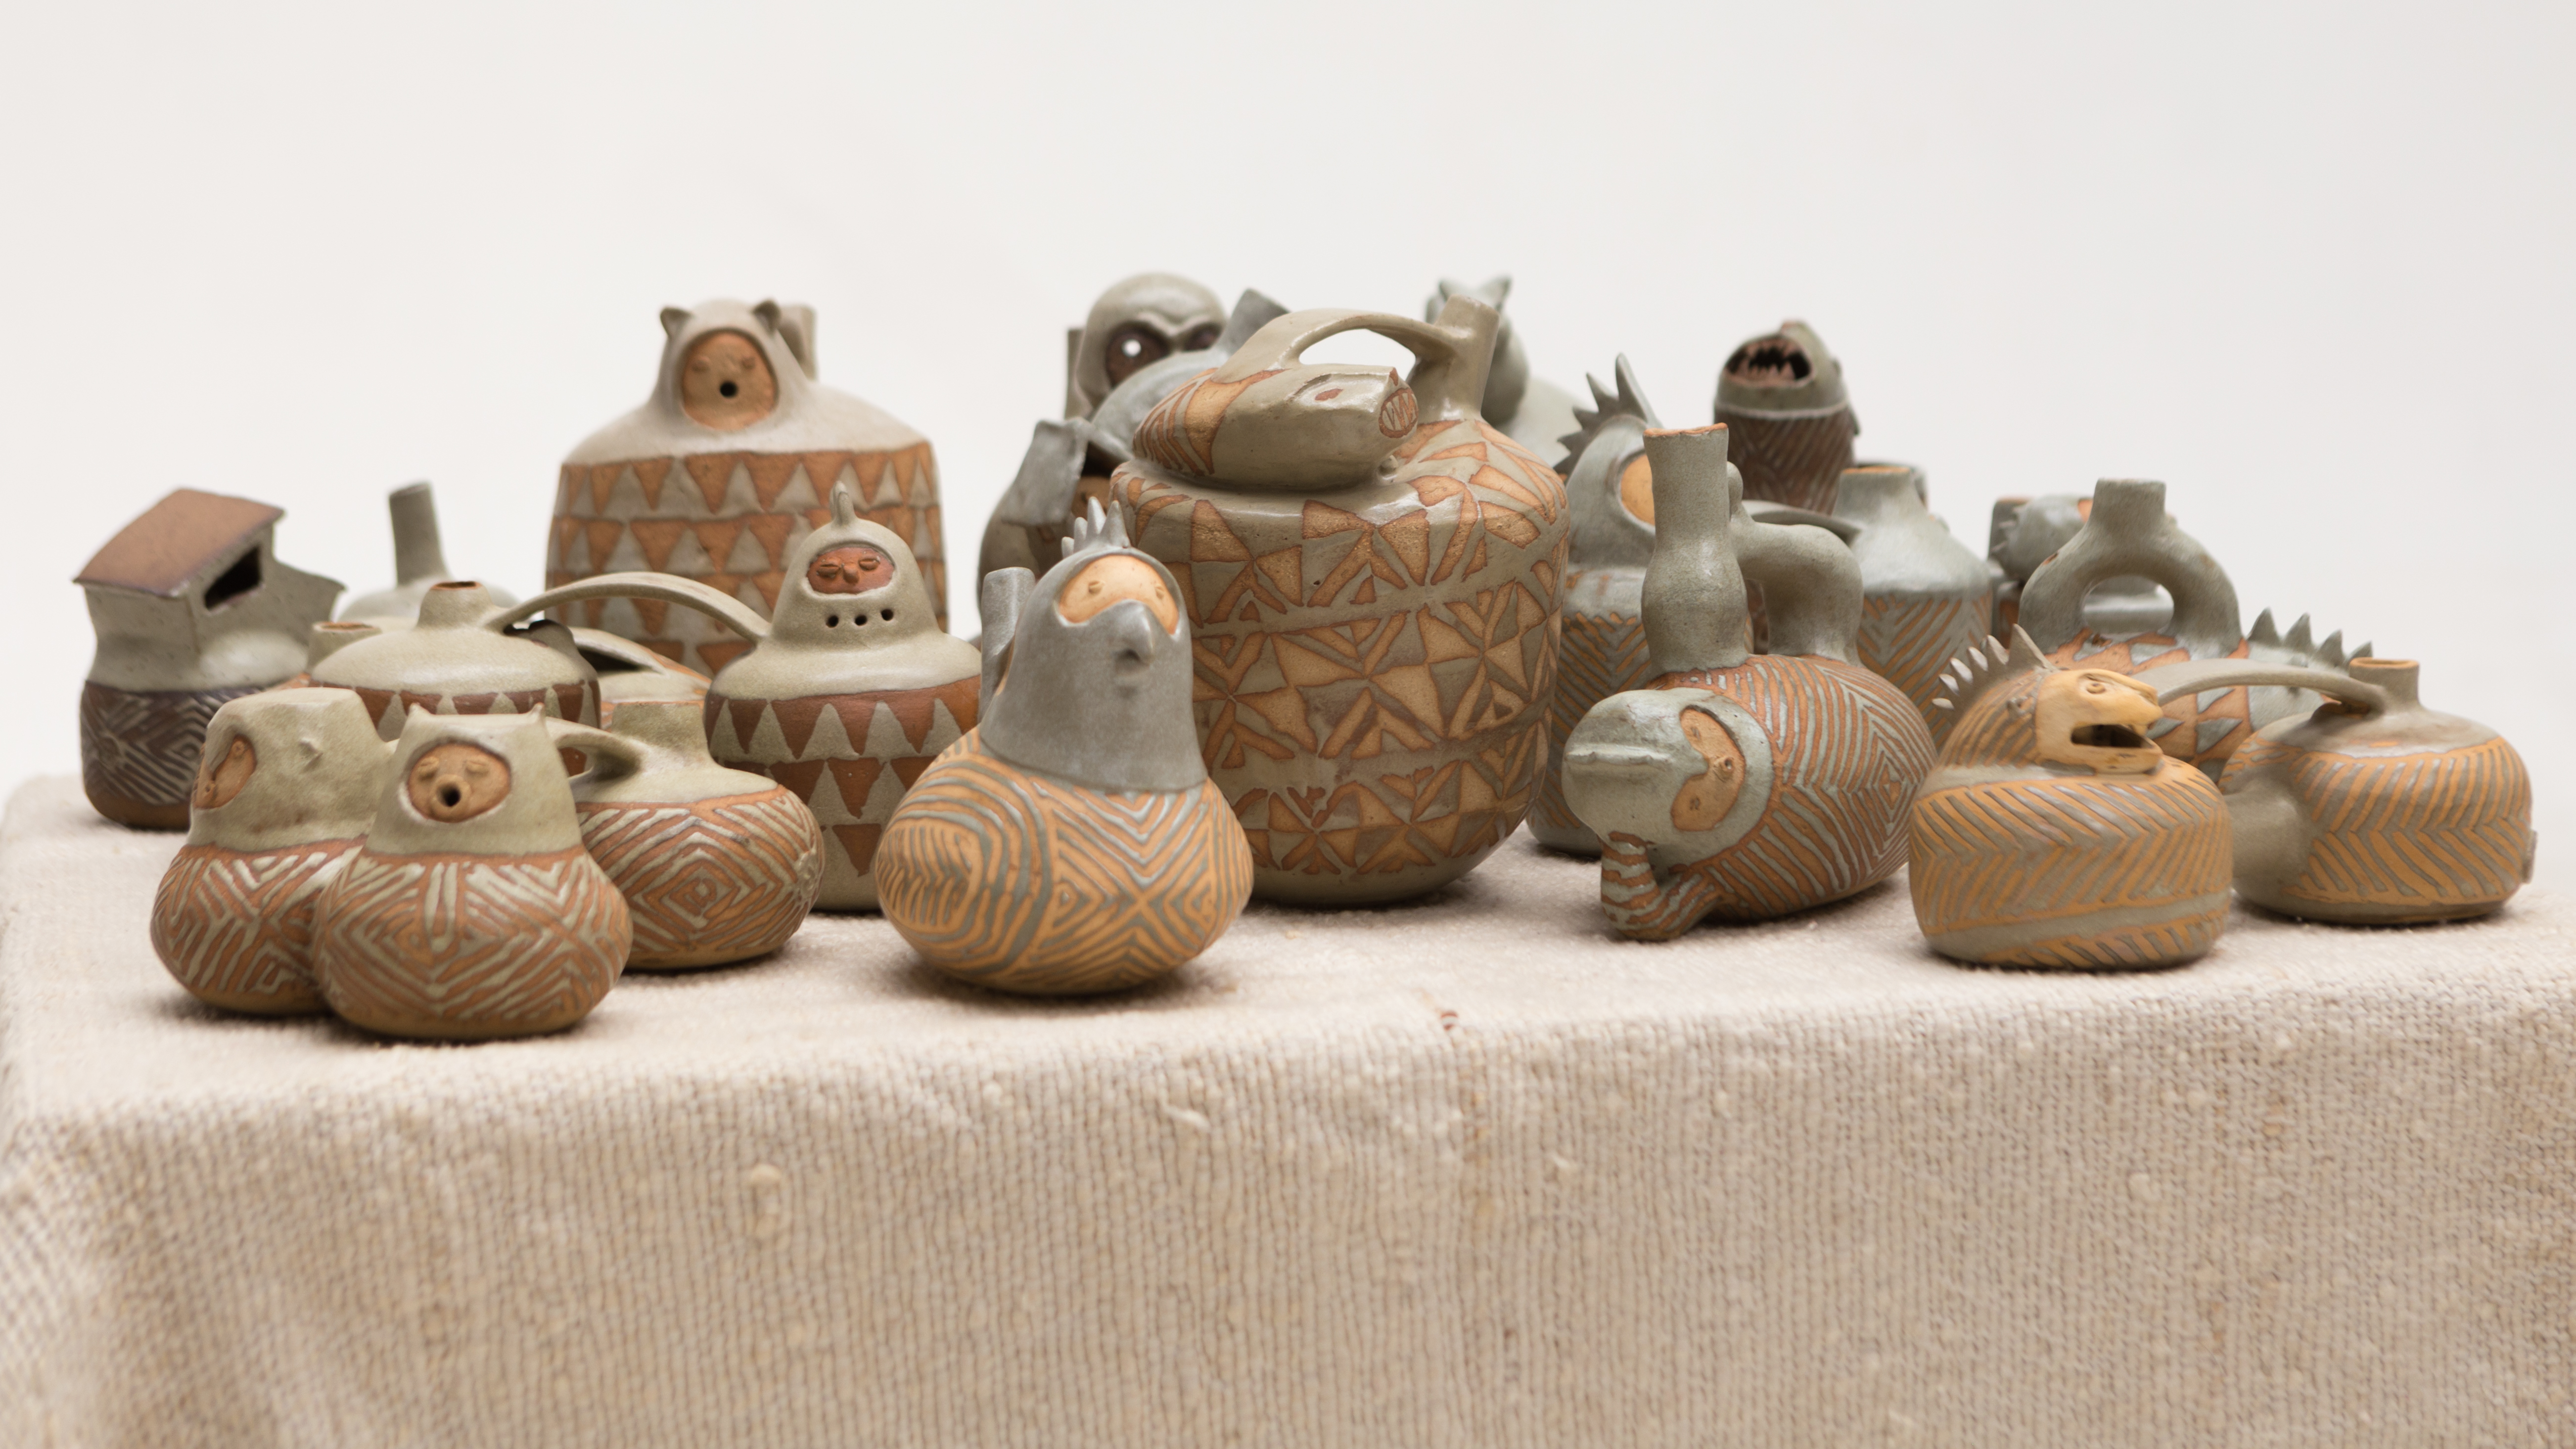 Sounds from the Andes / Clay and Sound / Whistling bottles / Francisca Gili